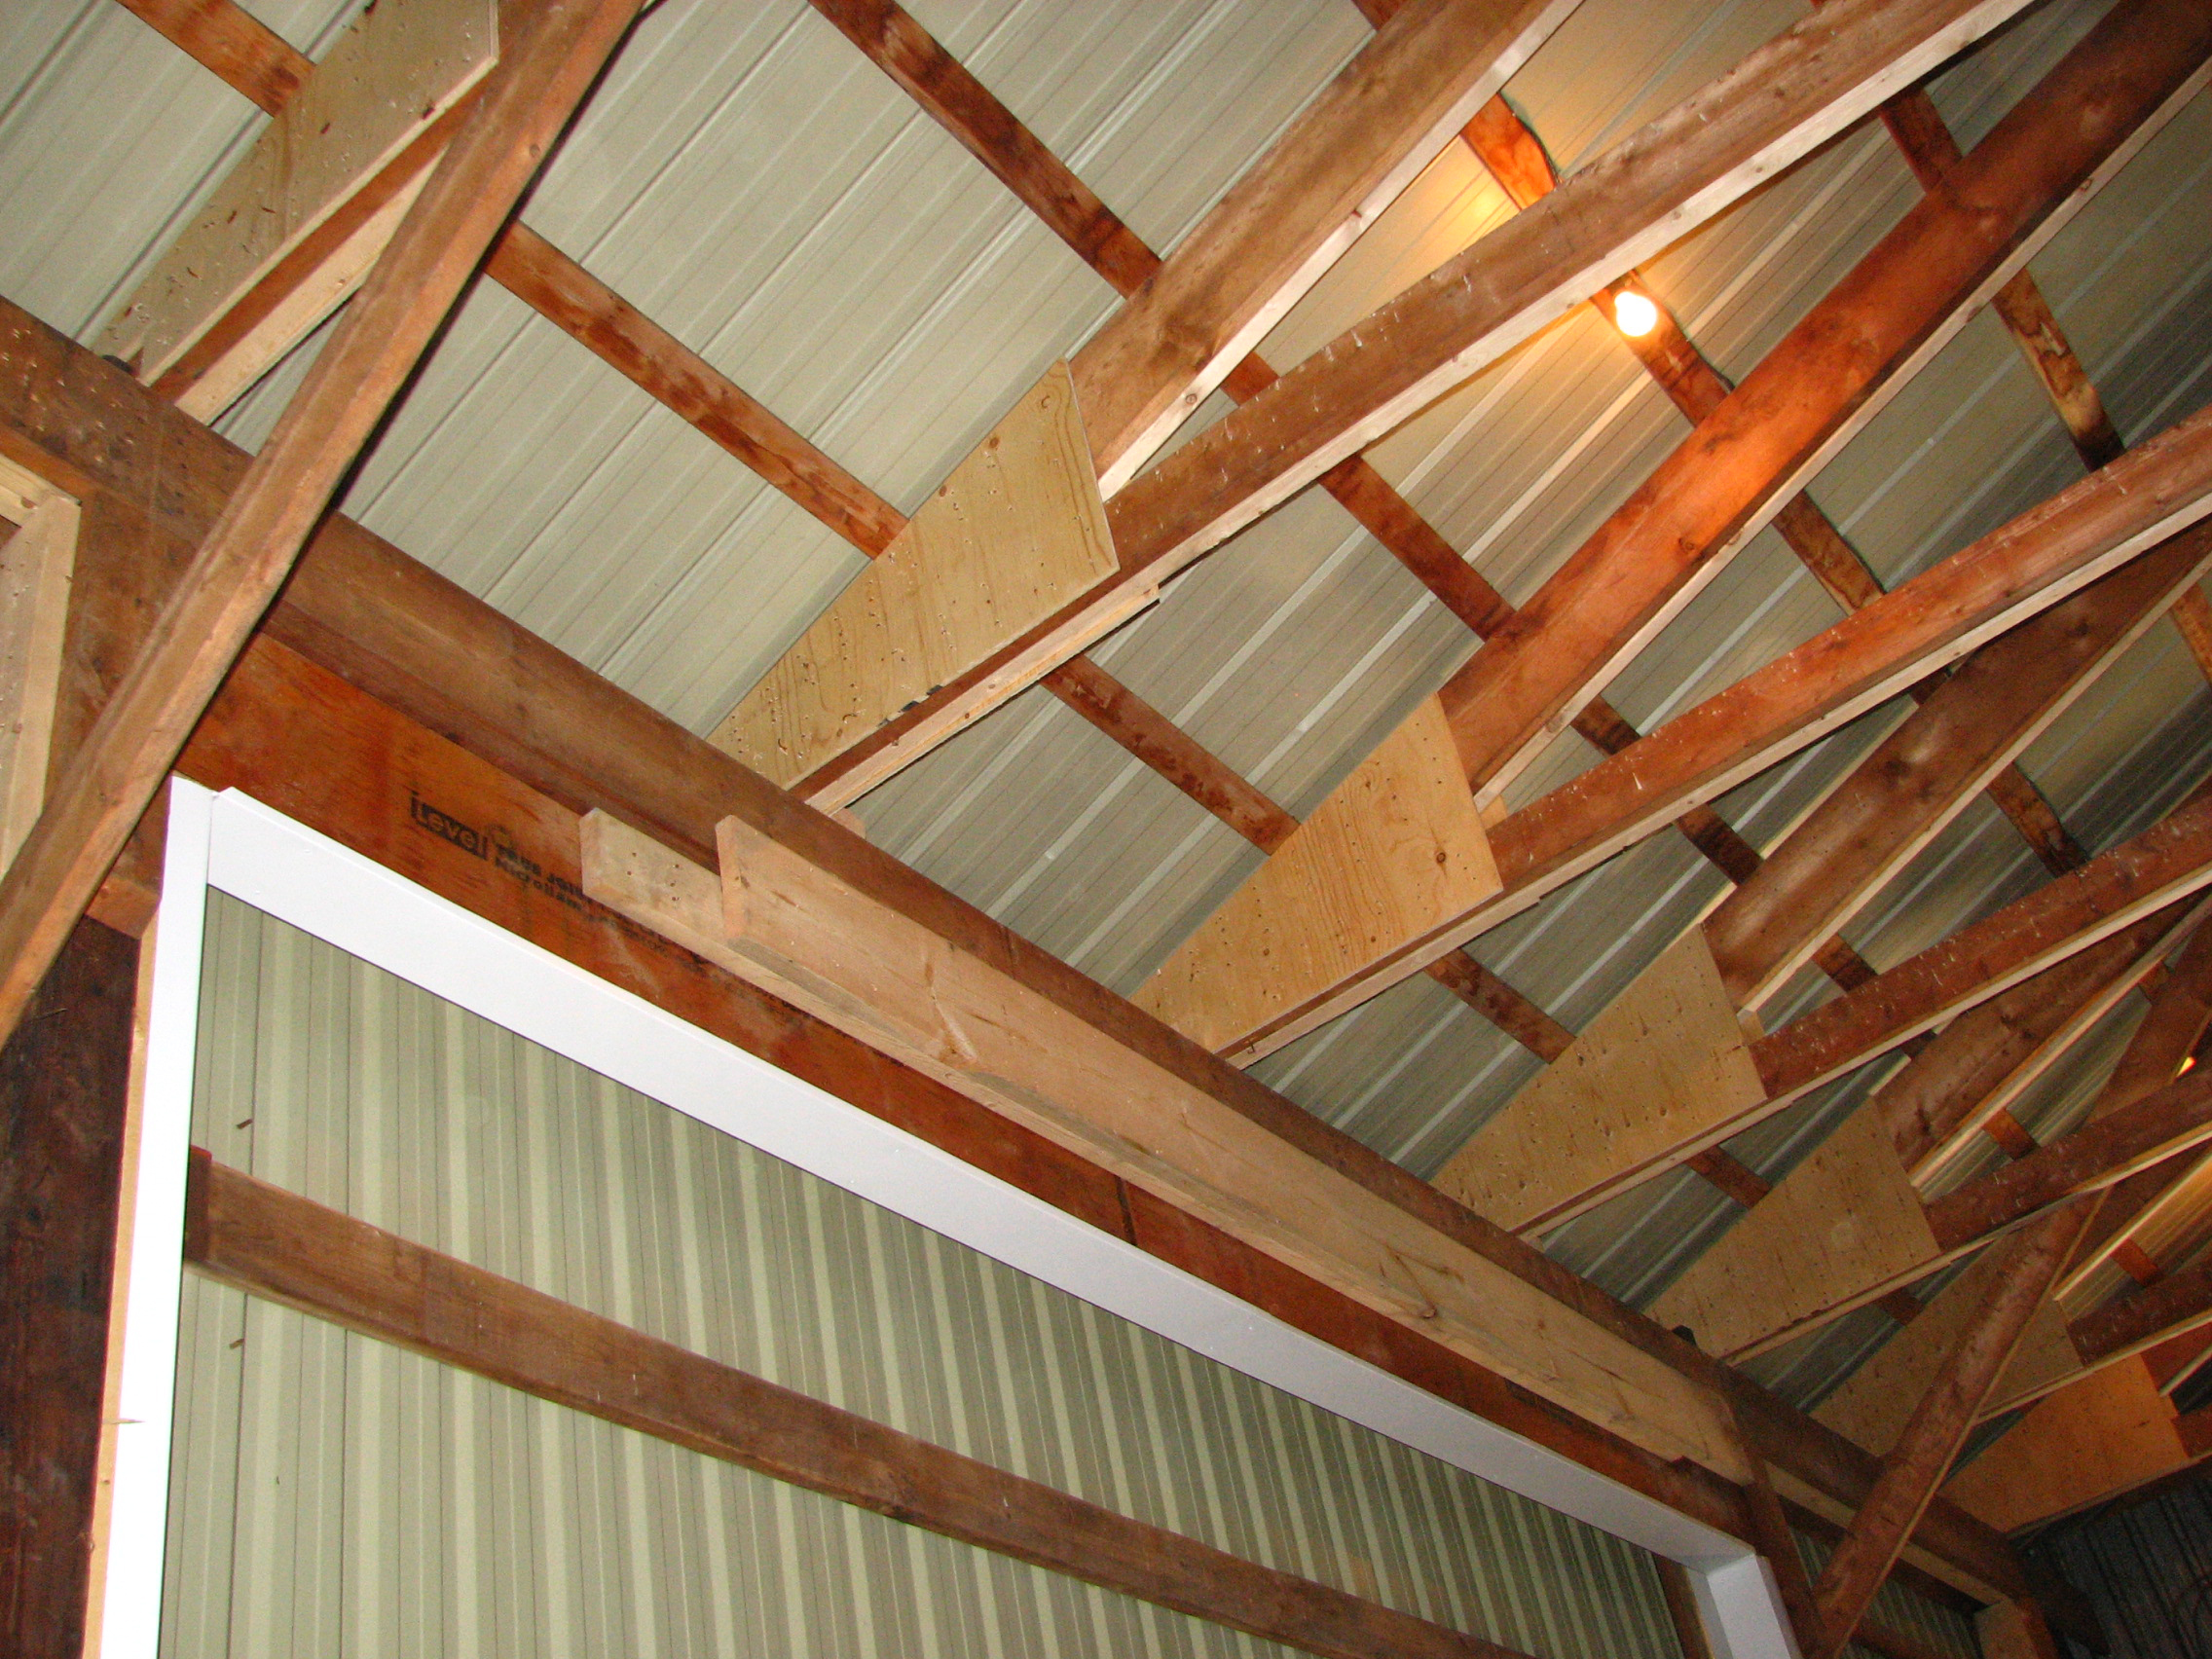 additional bracing, at the joints and chords, that was required to reinforce the beams in a storage shed. The newer bracing material (wood) is lighter in colour than the existing braces.